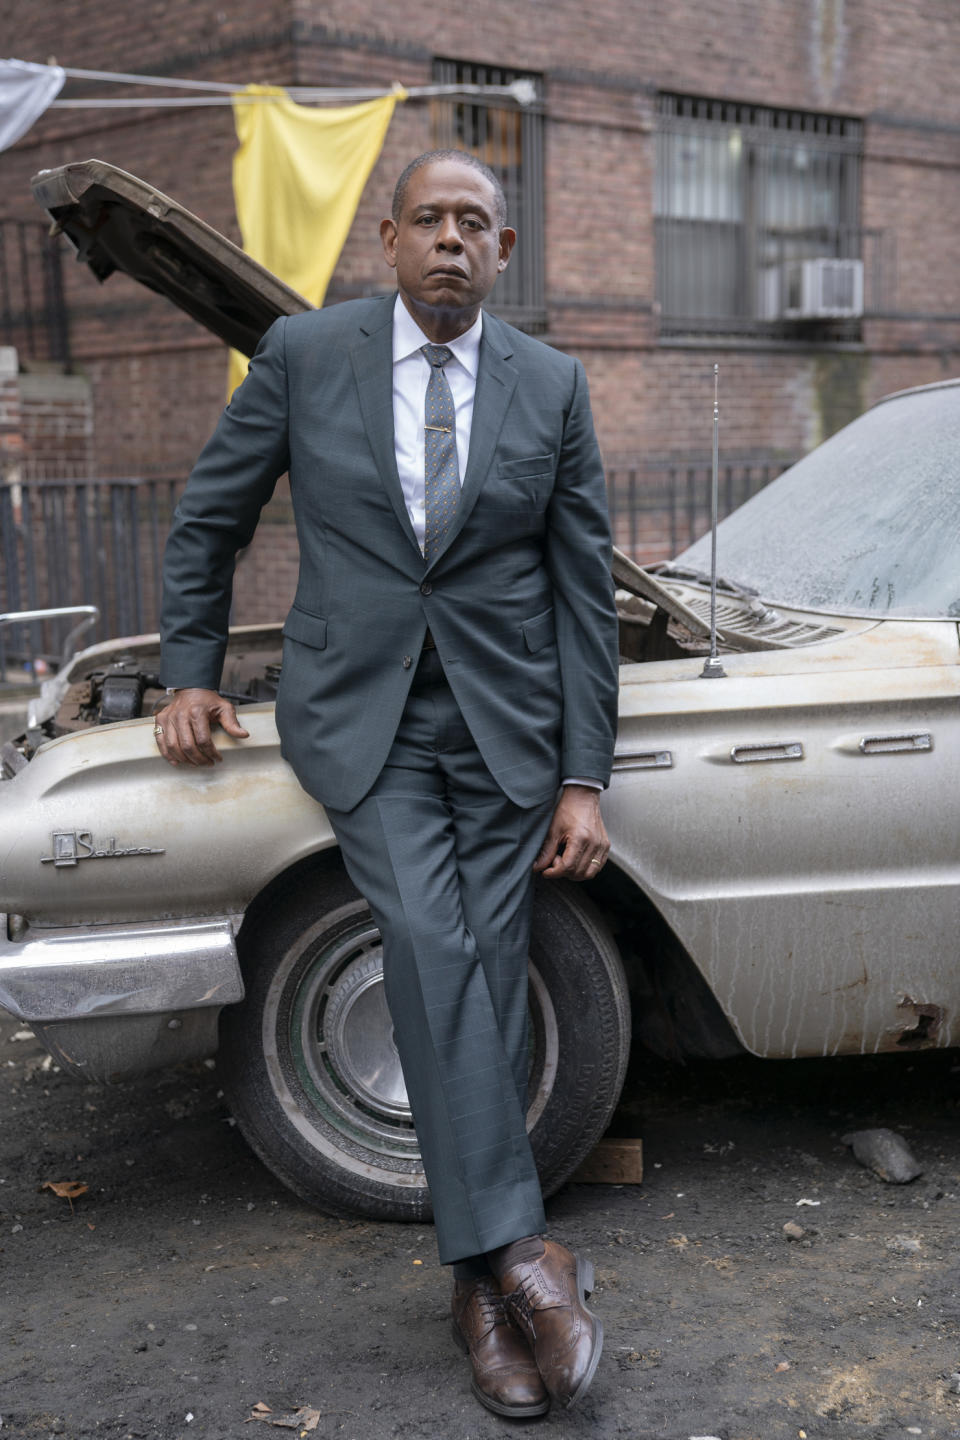 This image released by Epix shows Forest Whitaker as Bumpy Johnson in a scene from "Godfather of Harlem," premiering Sept. 29. (David Lee/Epix via AP)